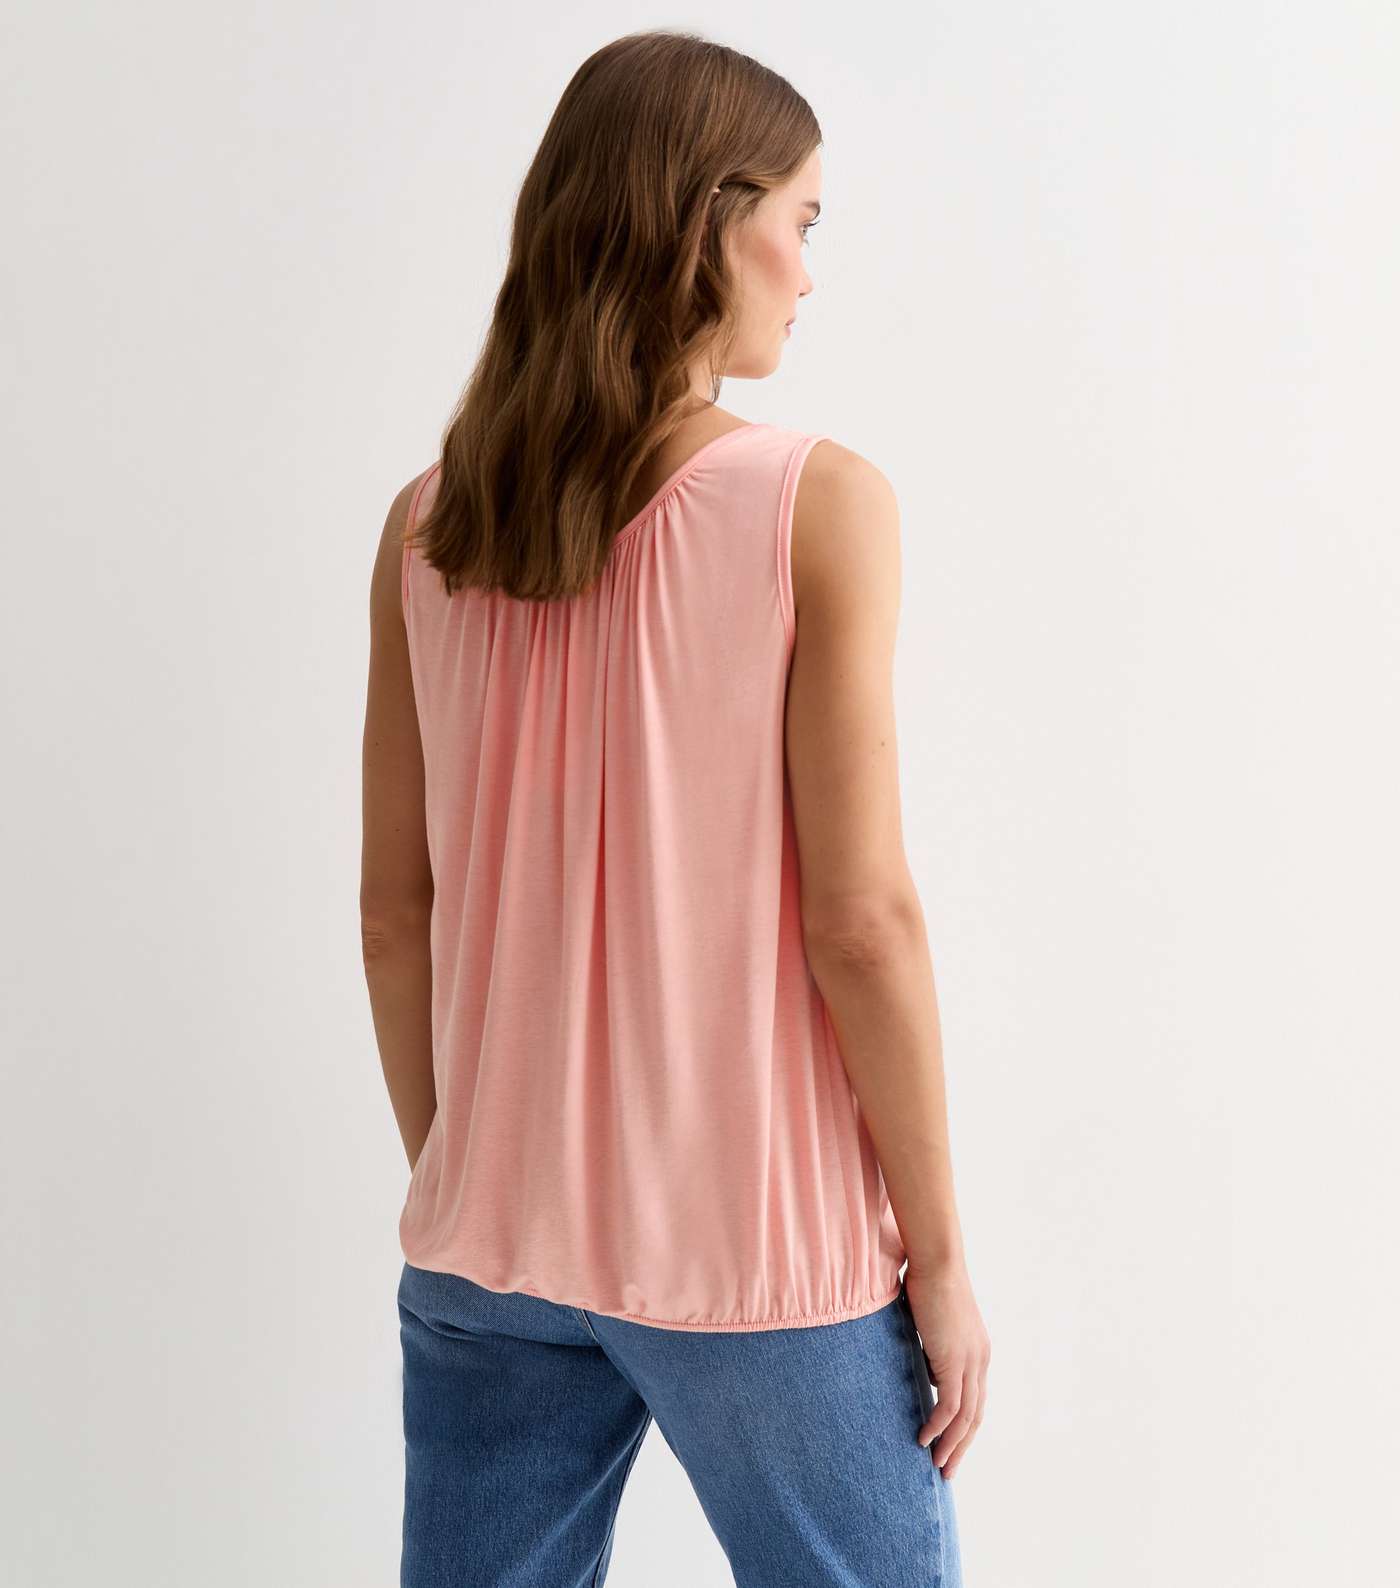 Gini London Pink Oversized Top Image 4